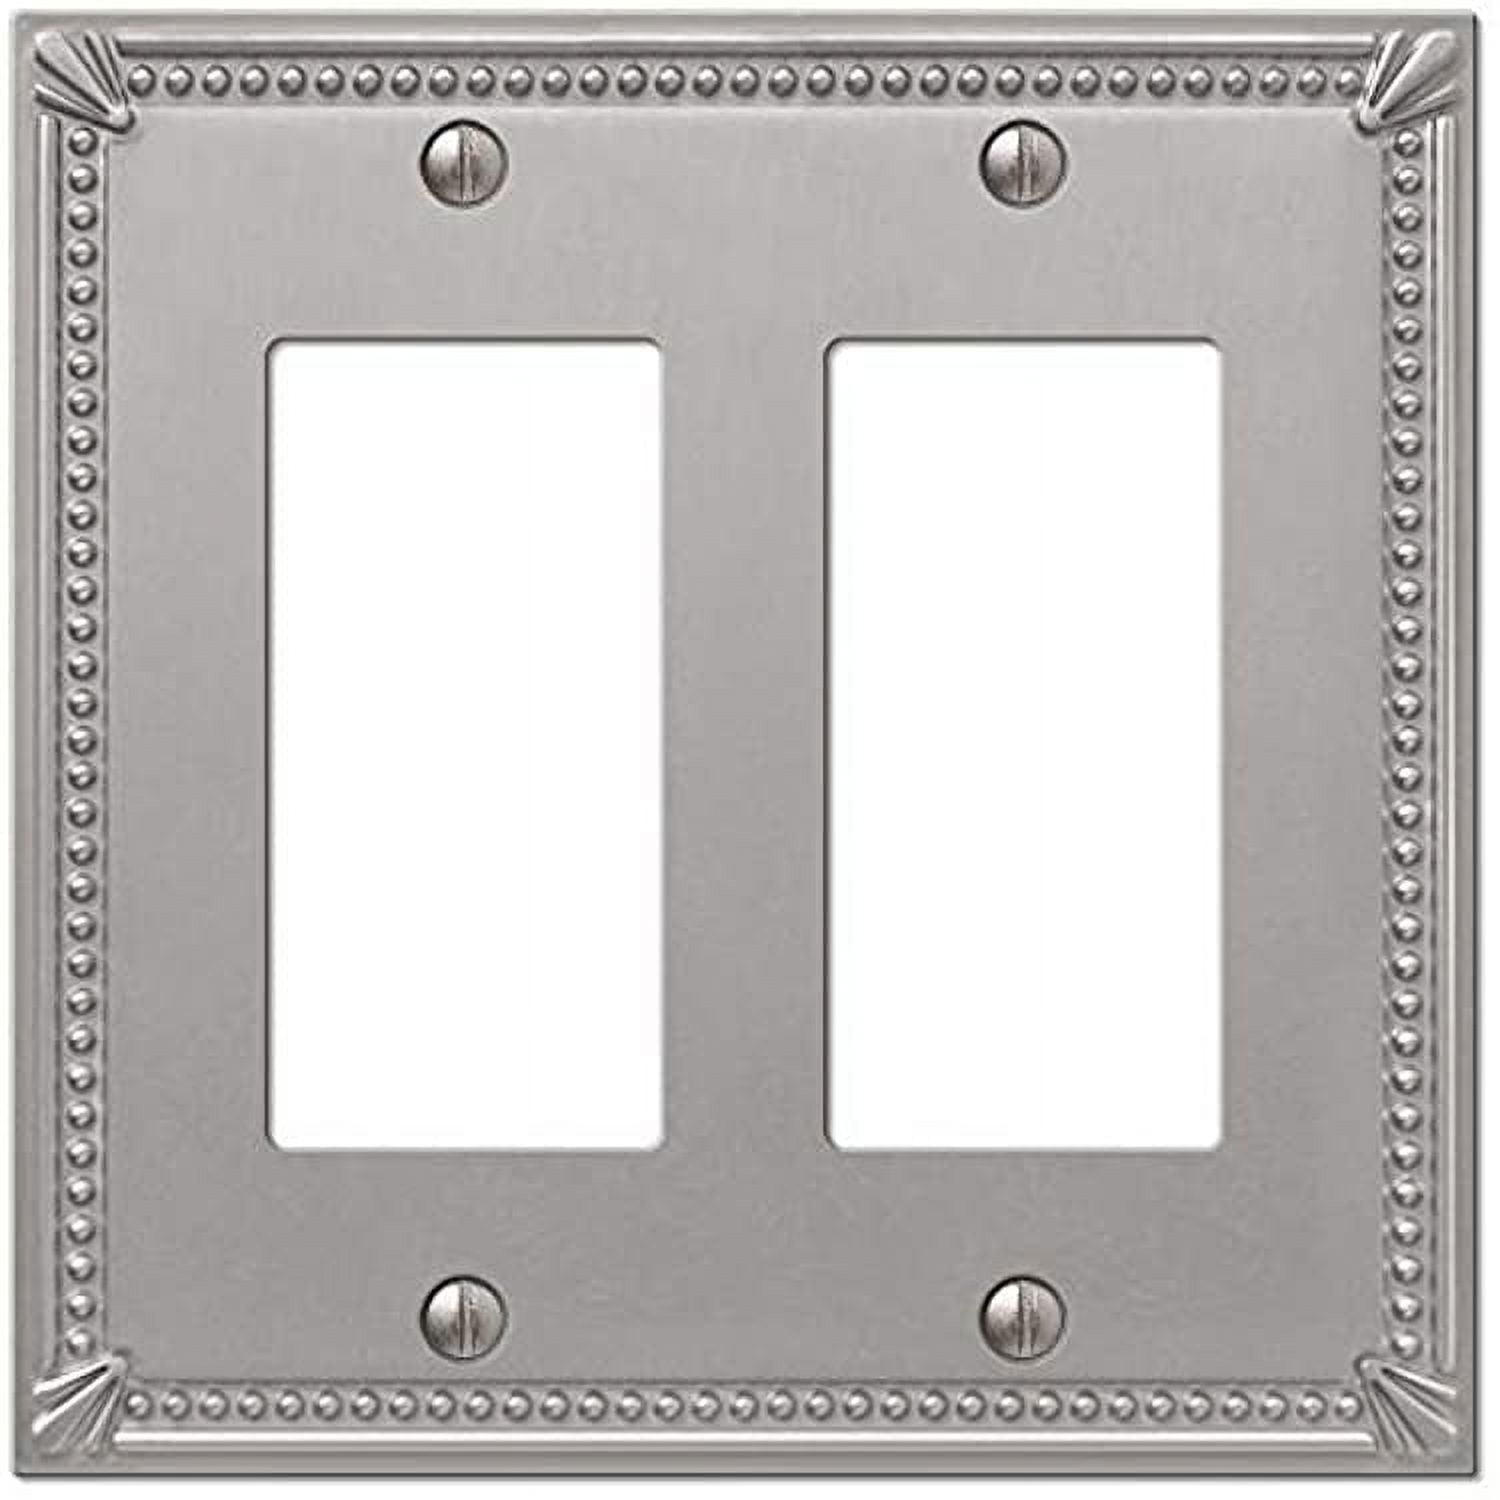 Picture of Amerelle 3009144 Imperial Bead Brushed Nickel 2 Gang Metal Rocker Wall Plate, Gray